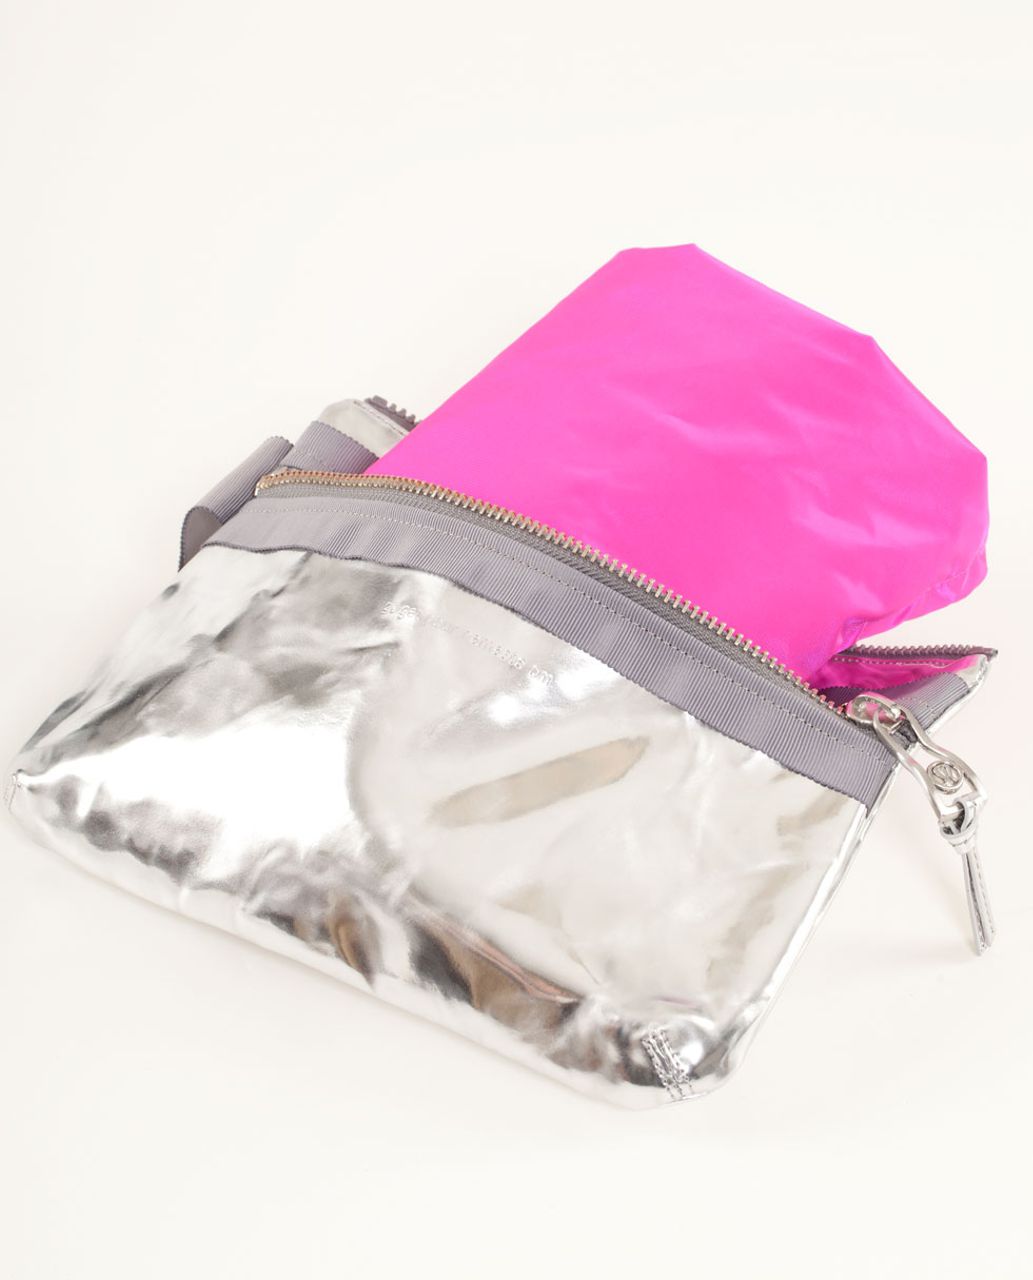 Lululemon Pack Your Practice Bag - Pow Pink